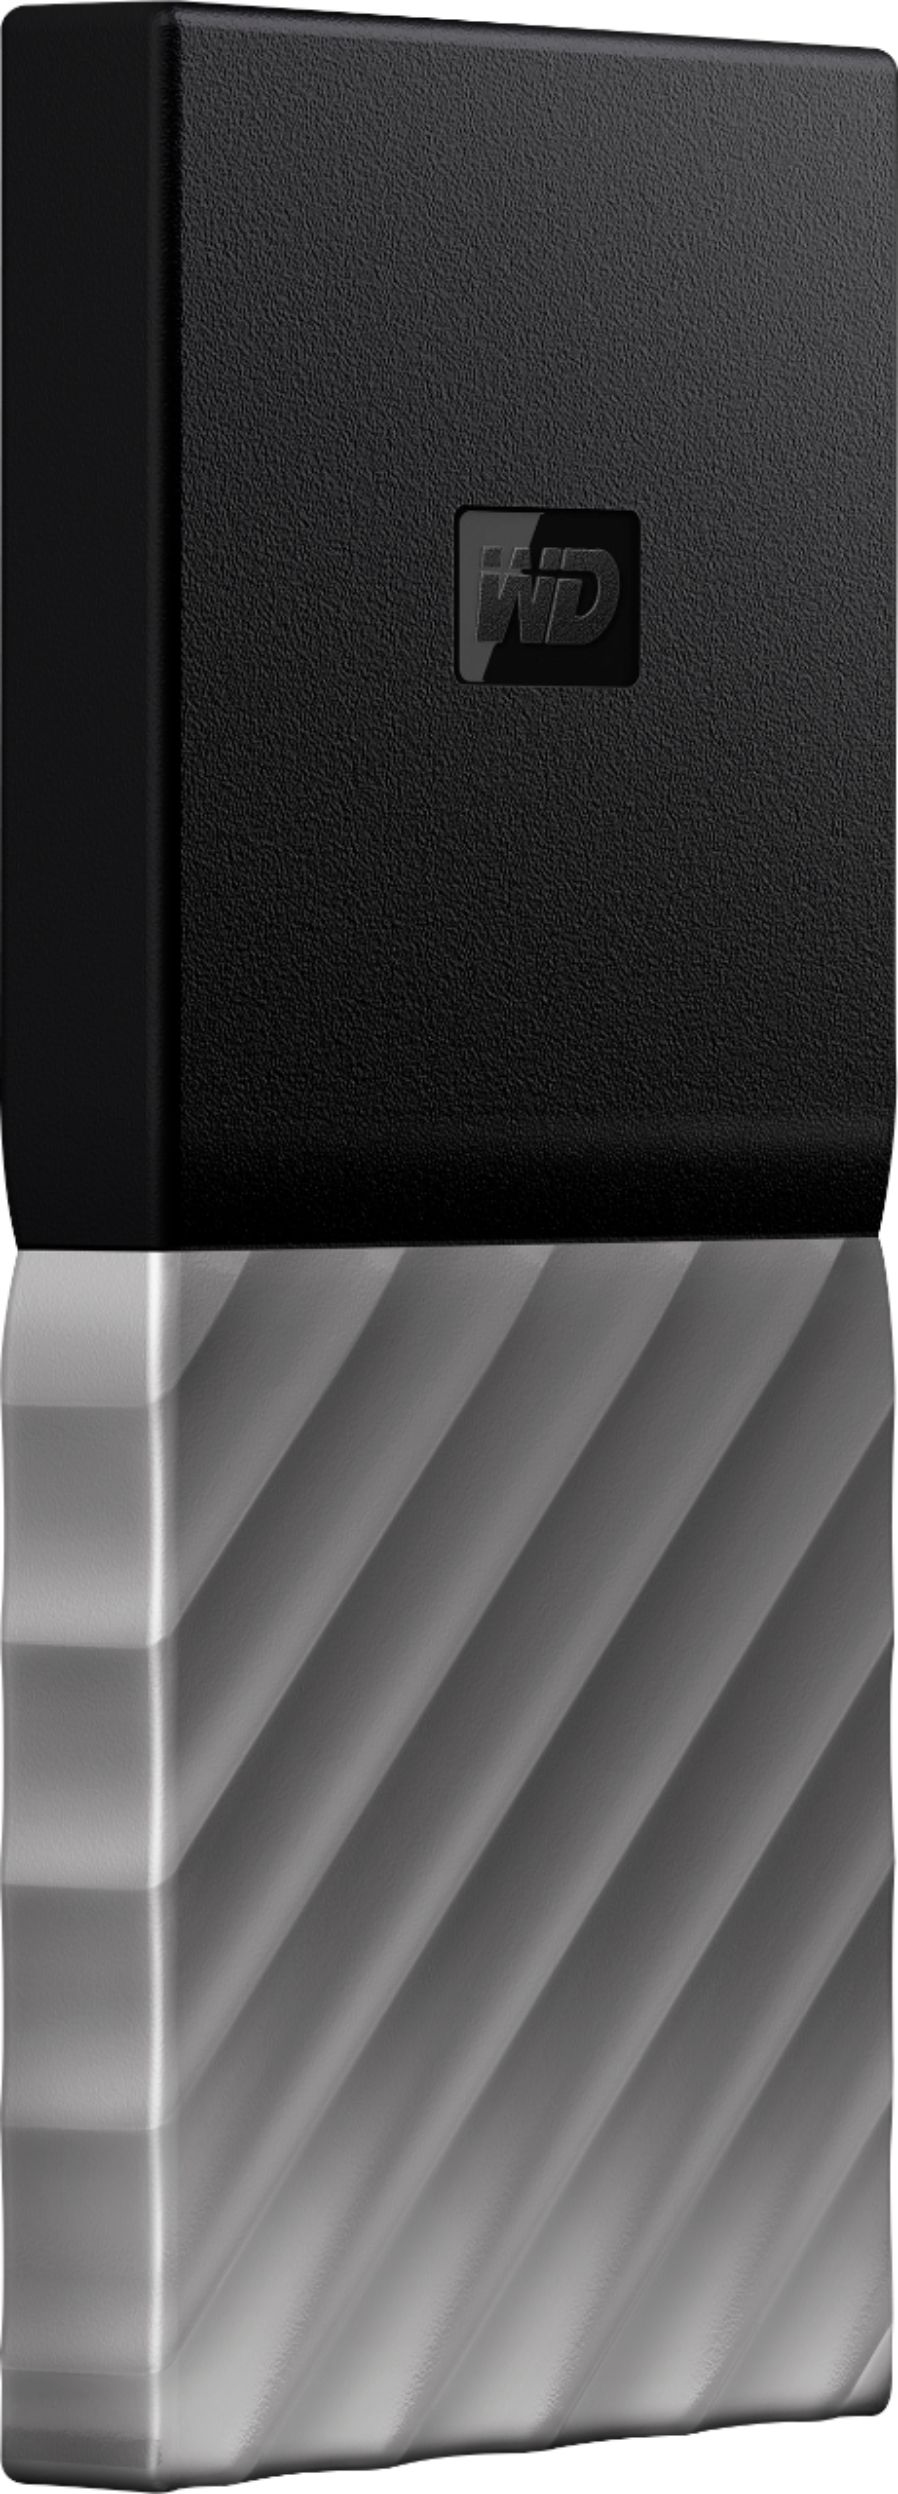 Angle View: WD - My Passport SSD 512GB External USB 3.1 Gen 2 Portable Solid State Drive - Black